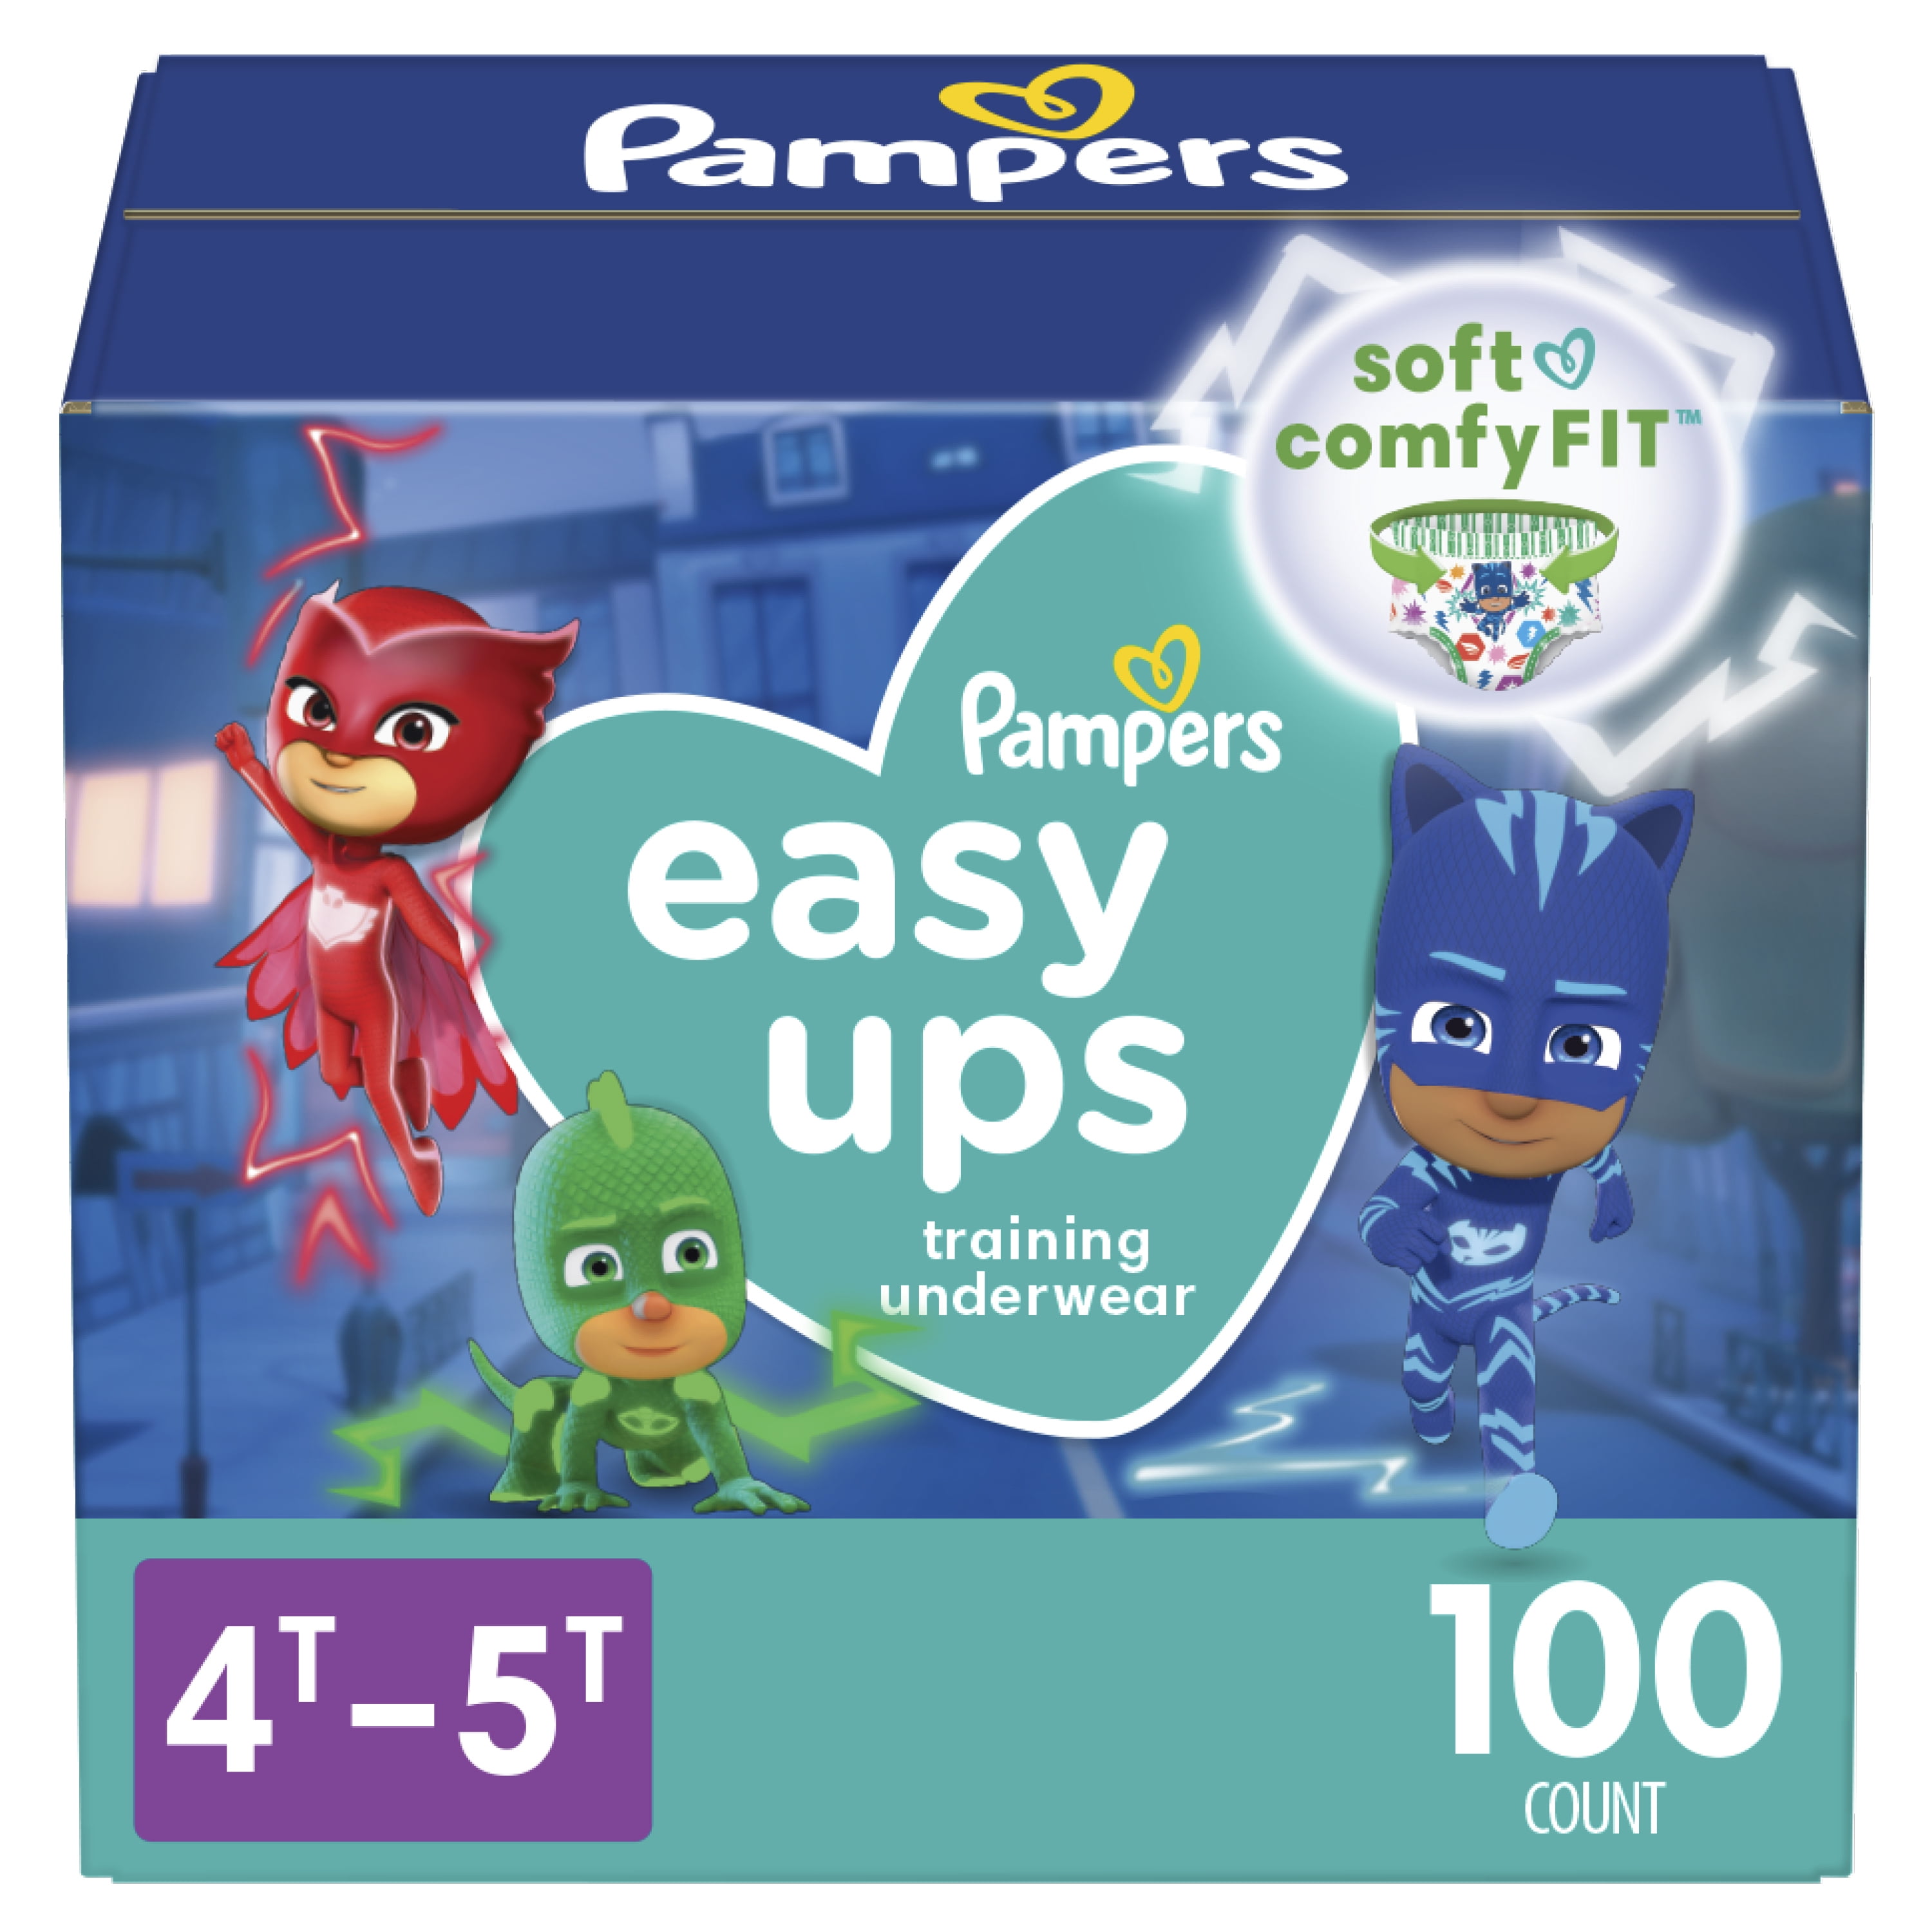 Pampers Easy Ups Training Underwear Boys Size 5 3T-4T 100 Count - 100 ea